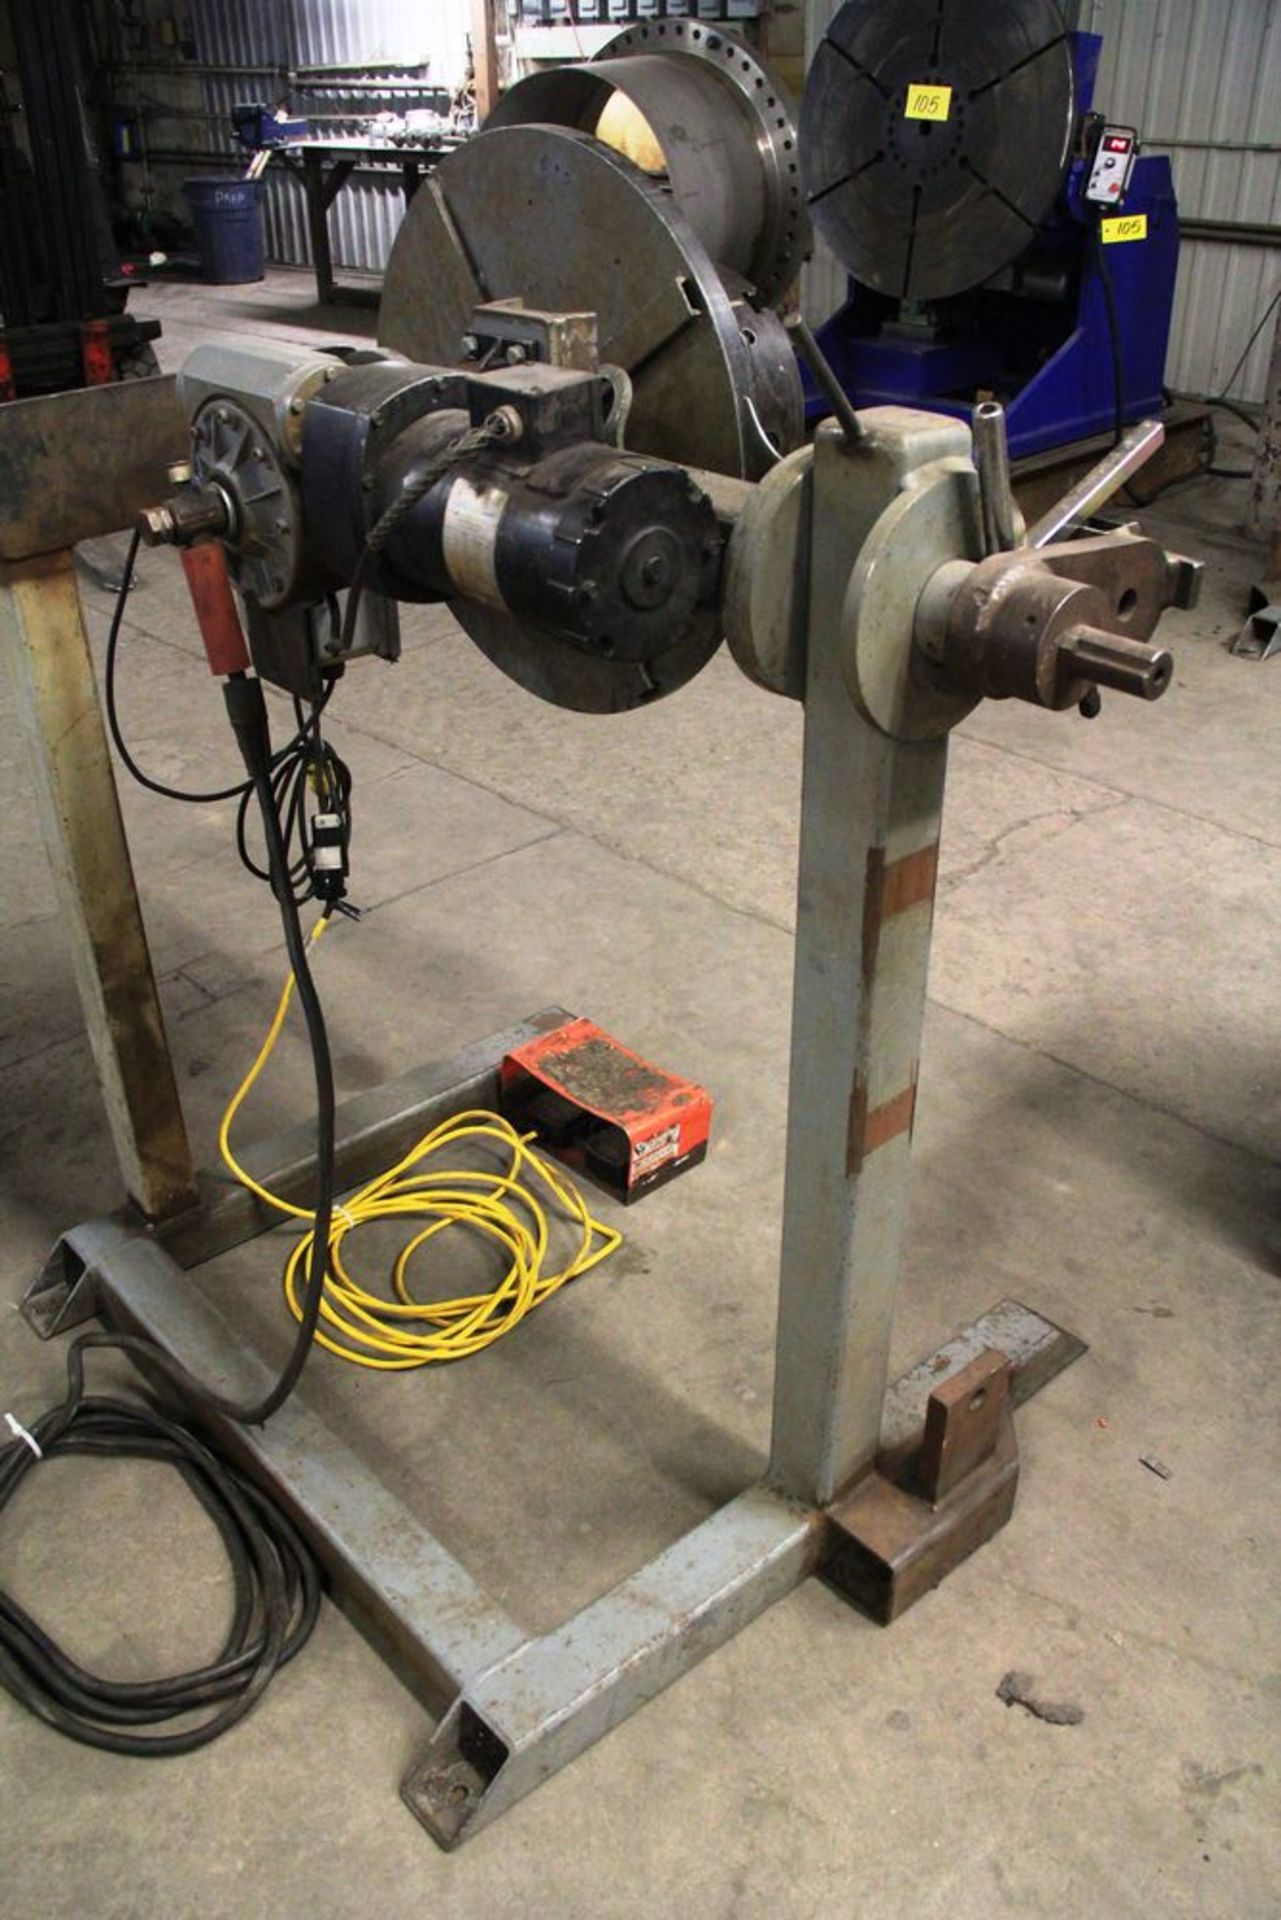 IRCO 2-2526 WELDING POSITIONER, 24" FACE PLATE, 3 JAW CHUCK, FOOT CONTROLLER, 1 PHASE, 110 AMP, - Image 3 of 3